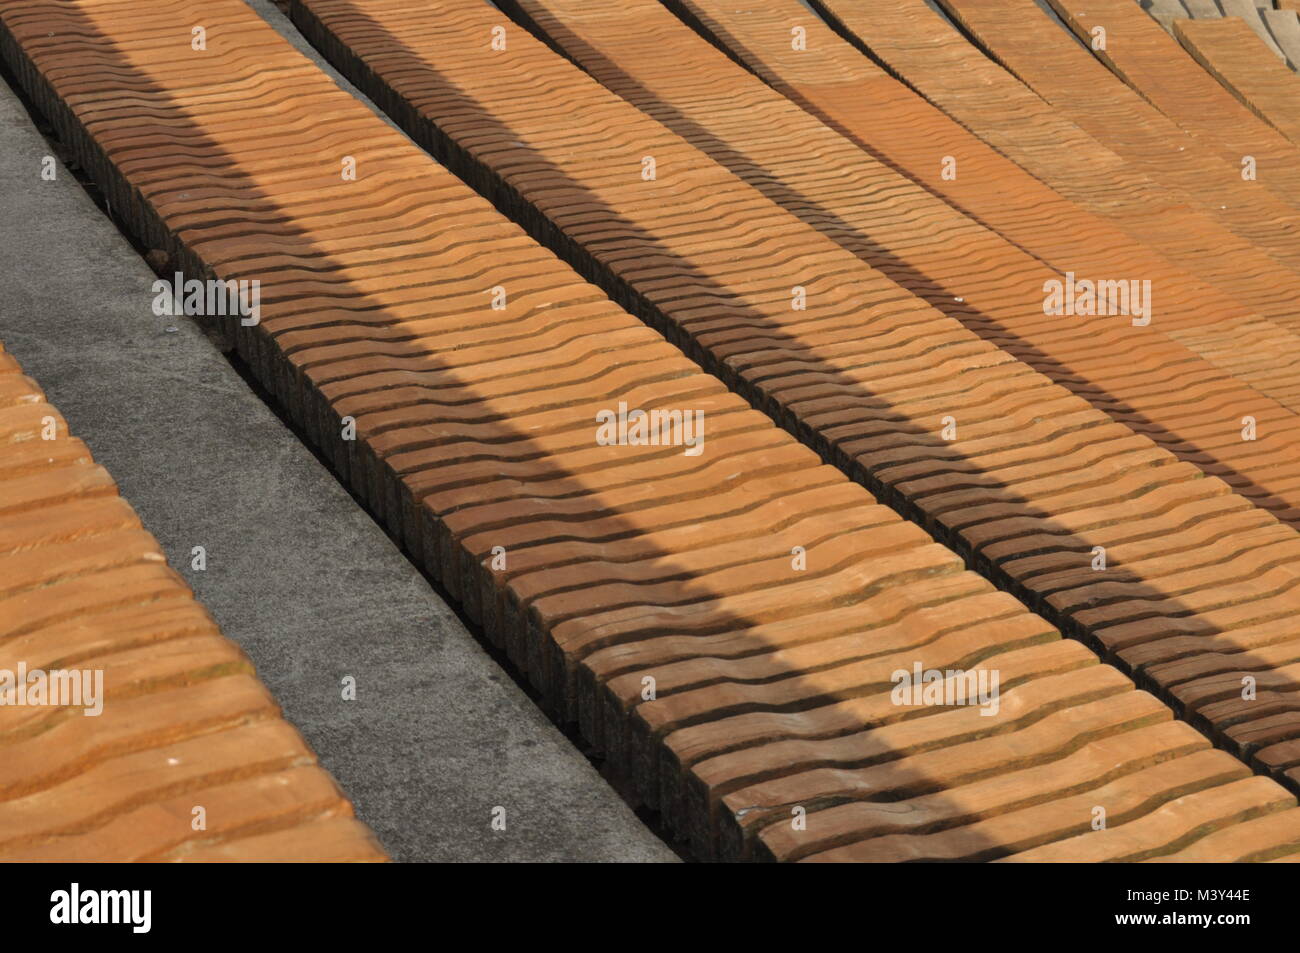 Amphitheater. Wooden benches set in stone circle. Stock Photo